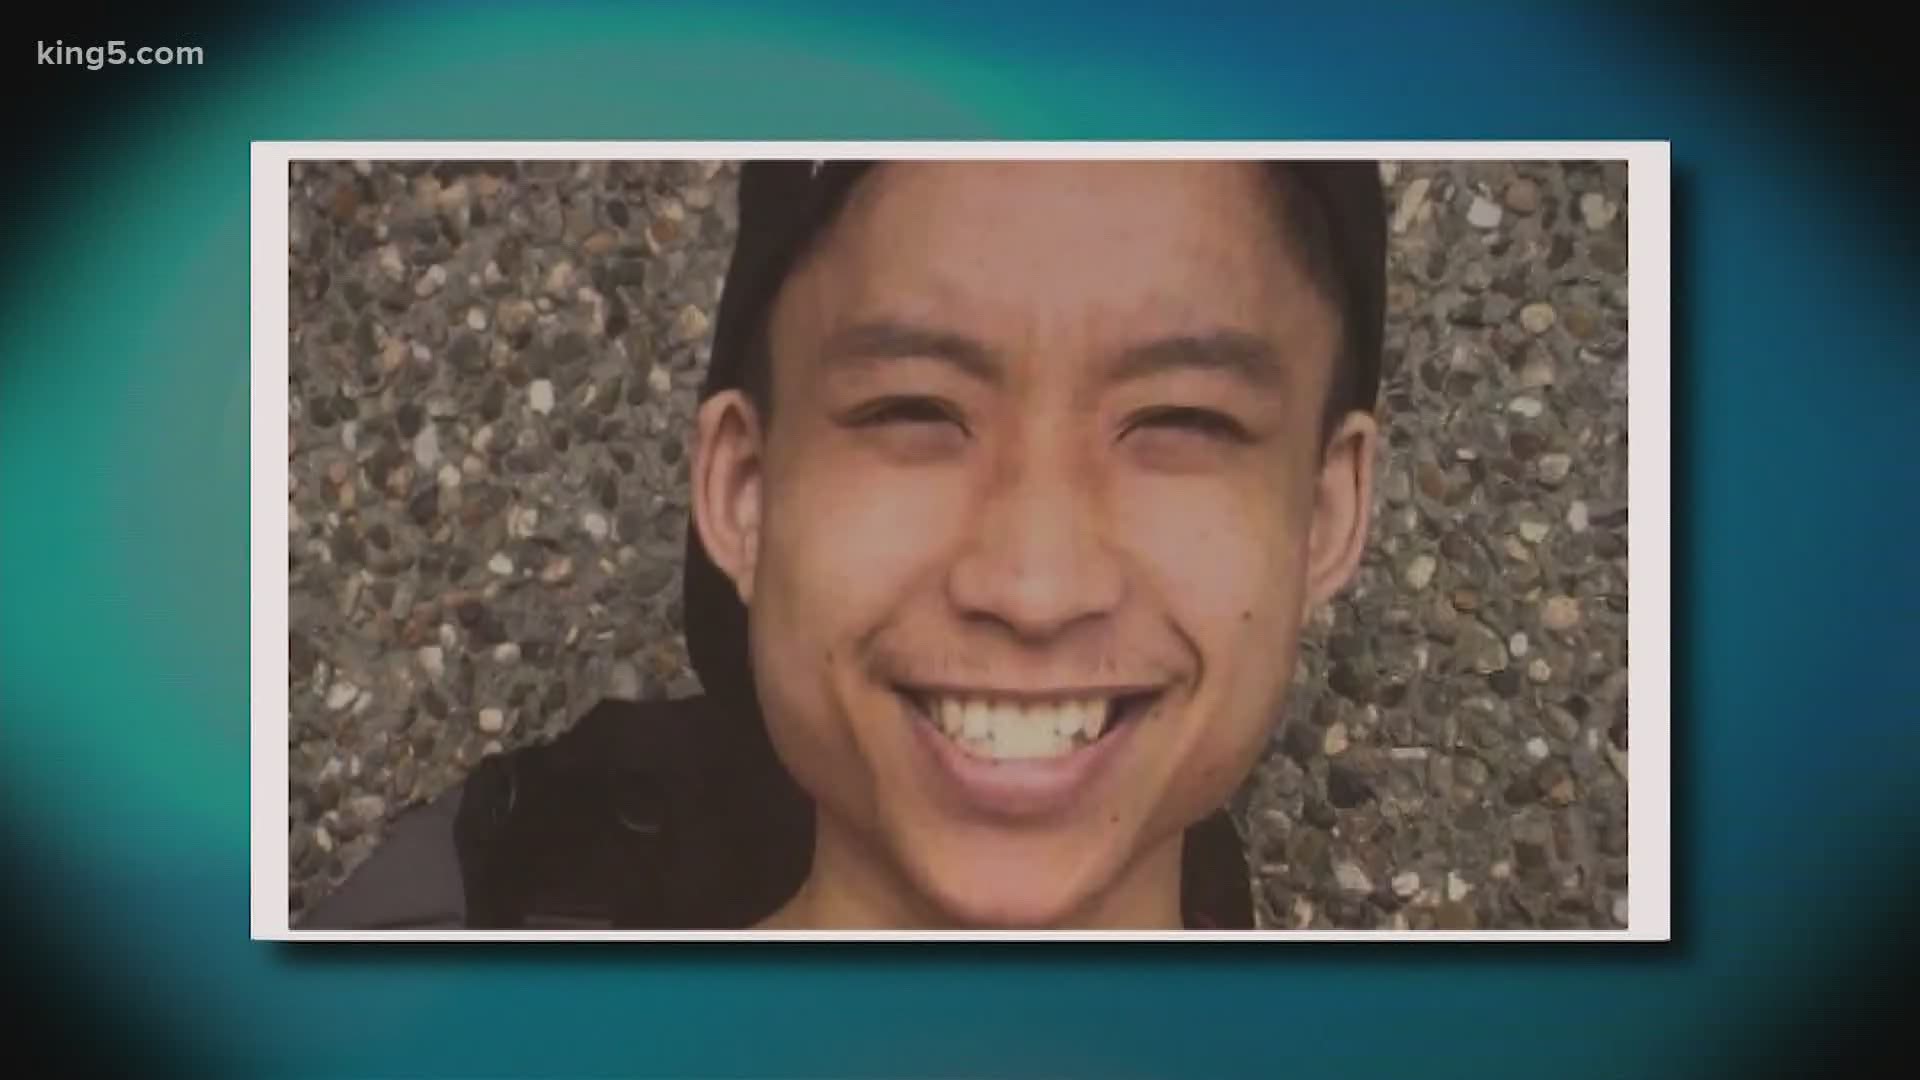 Tommy Le was fatally shot by a deputy in Burien in June 2017. The King County Sheriff's Office later revealed he was holding a pen instead of a knife.